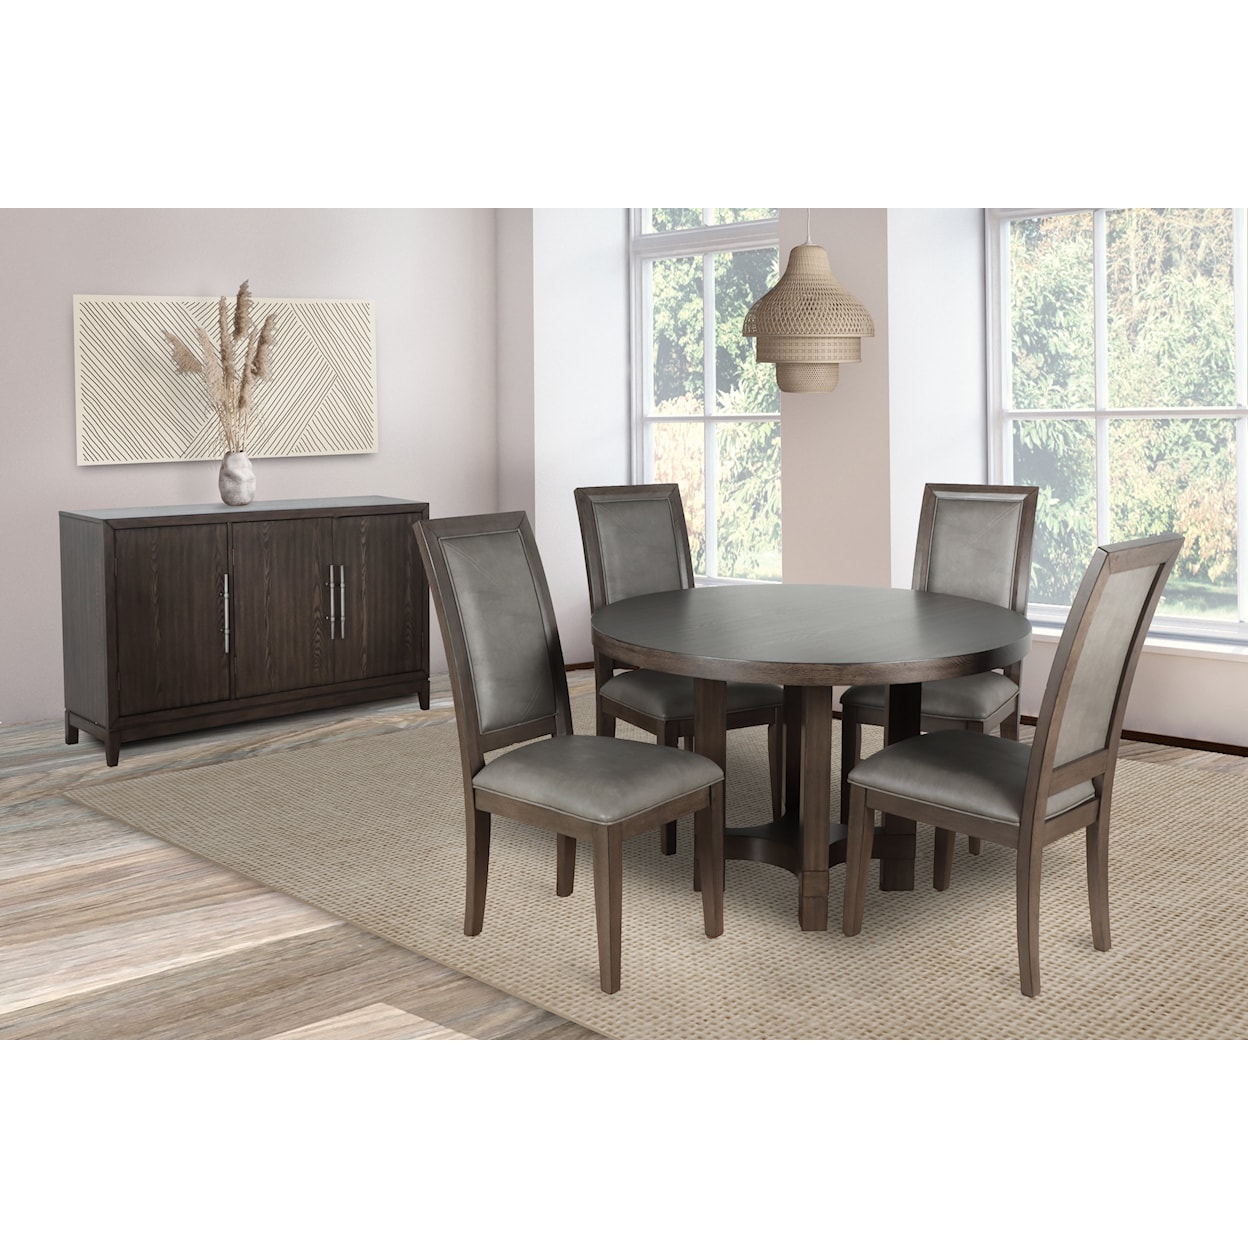 New Classic Furniture Cityscape Round Dining Table